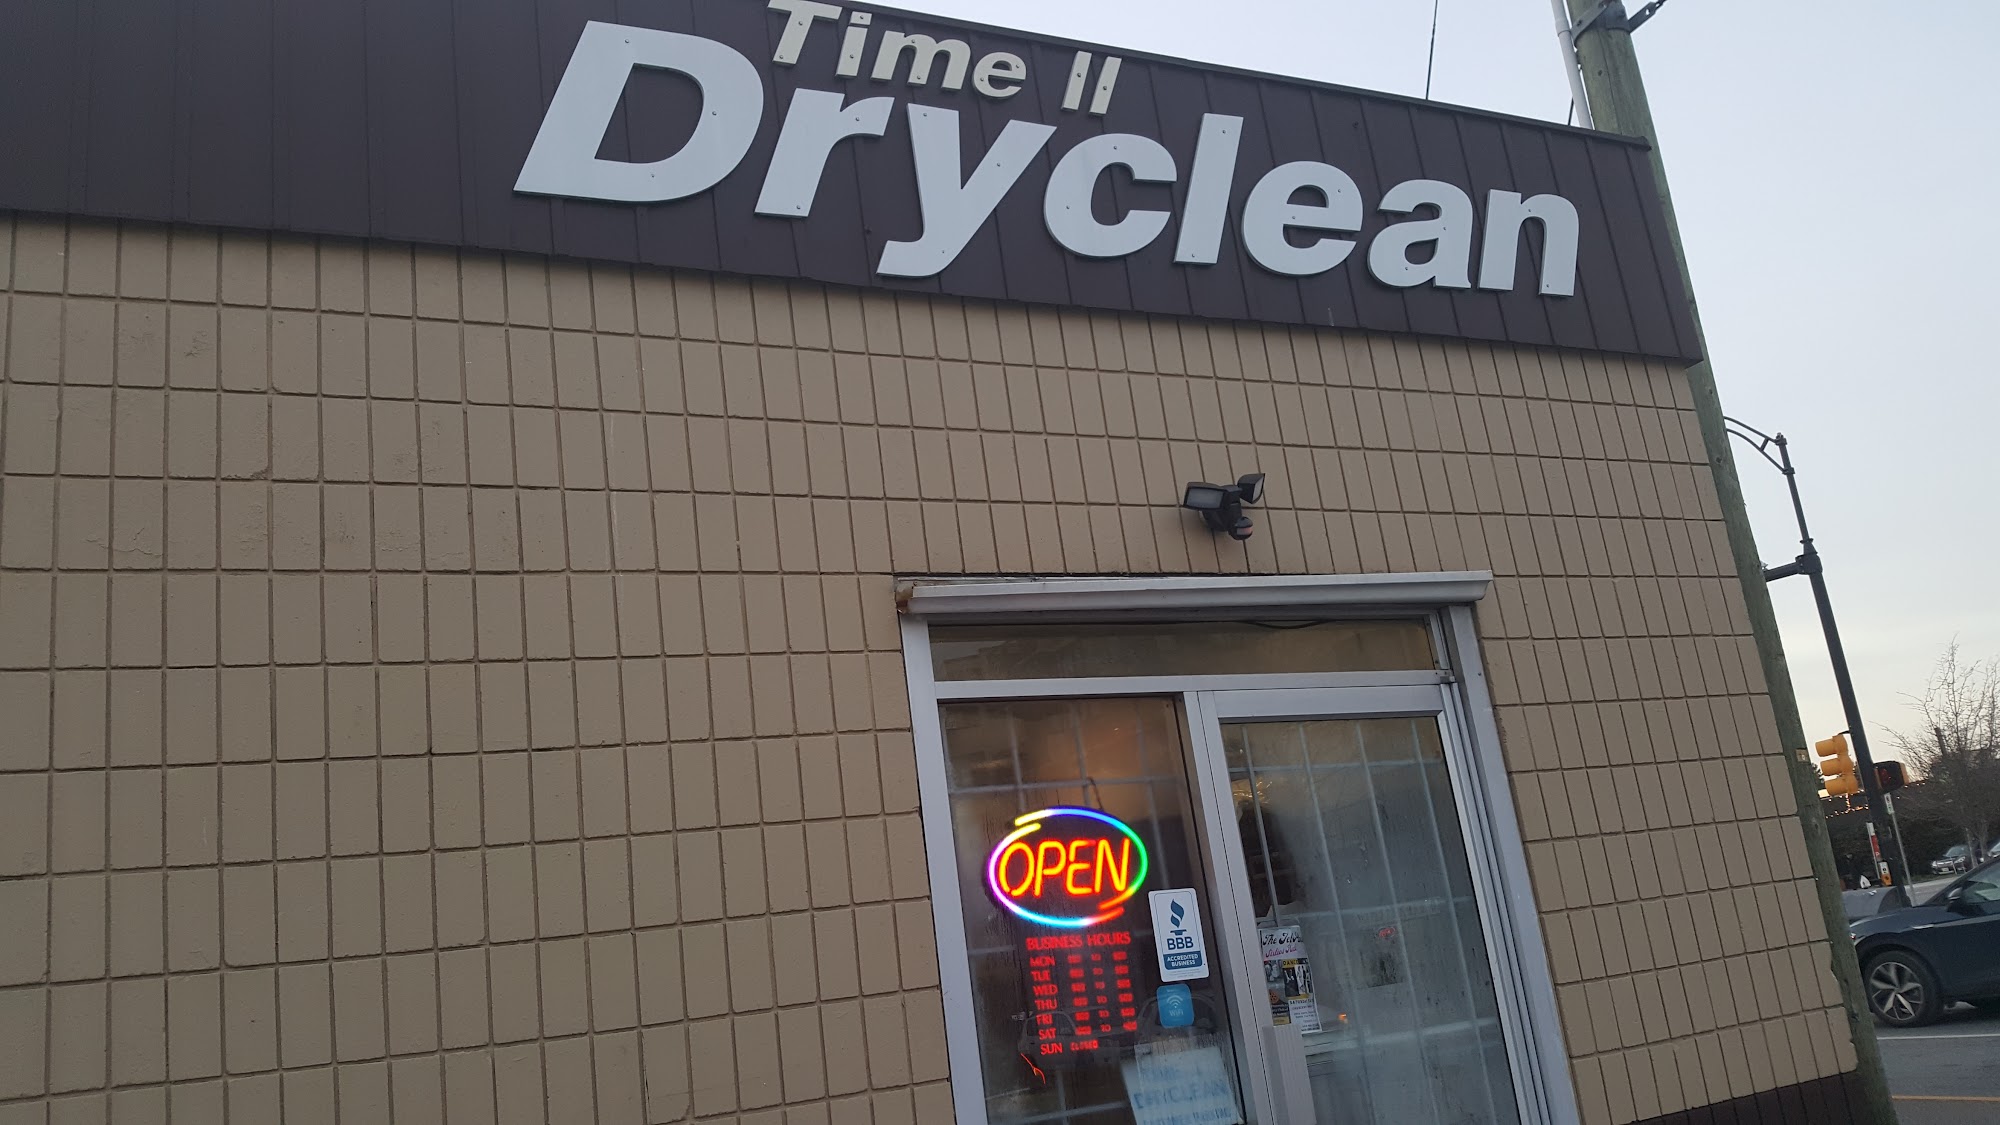 Time II Dryclean & Tailor Shop